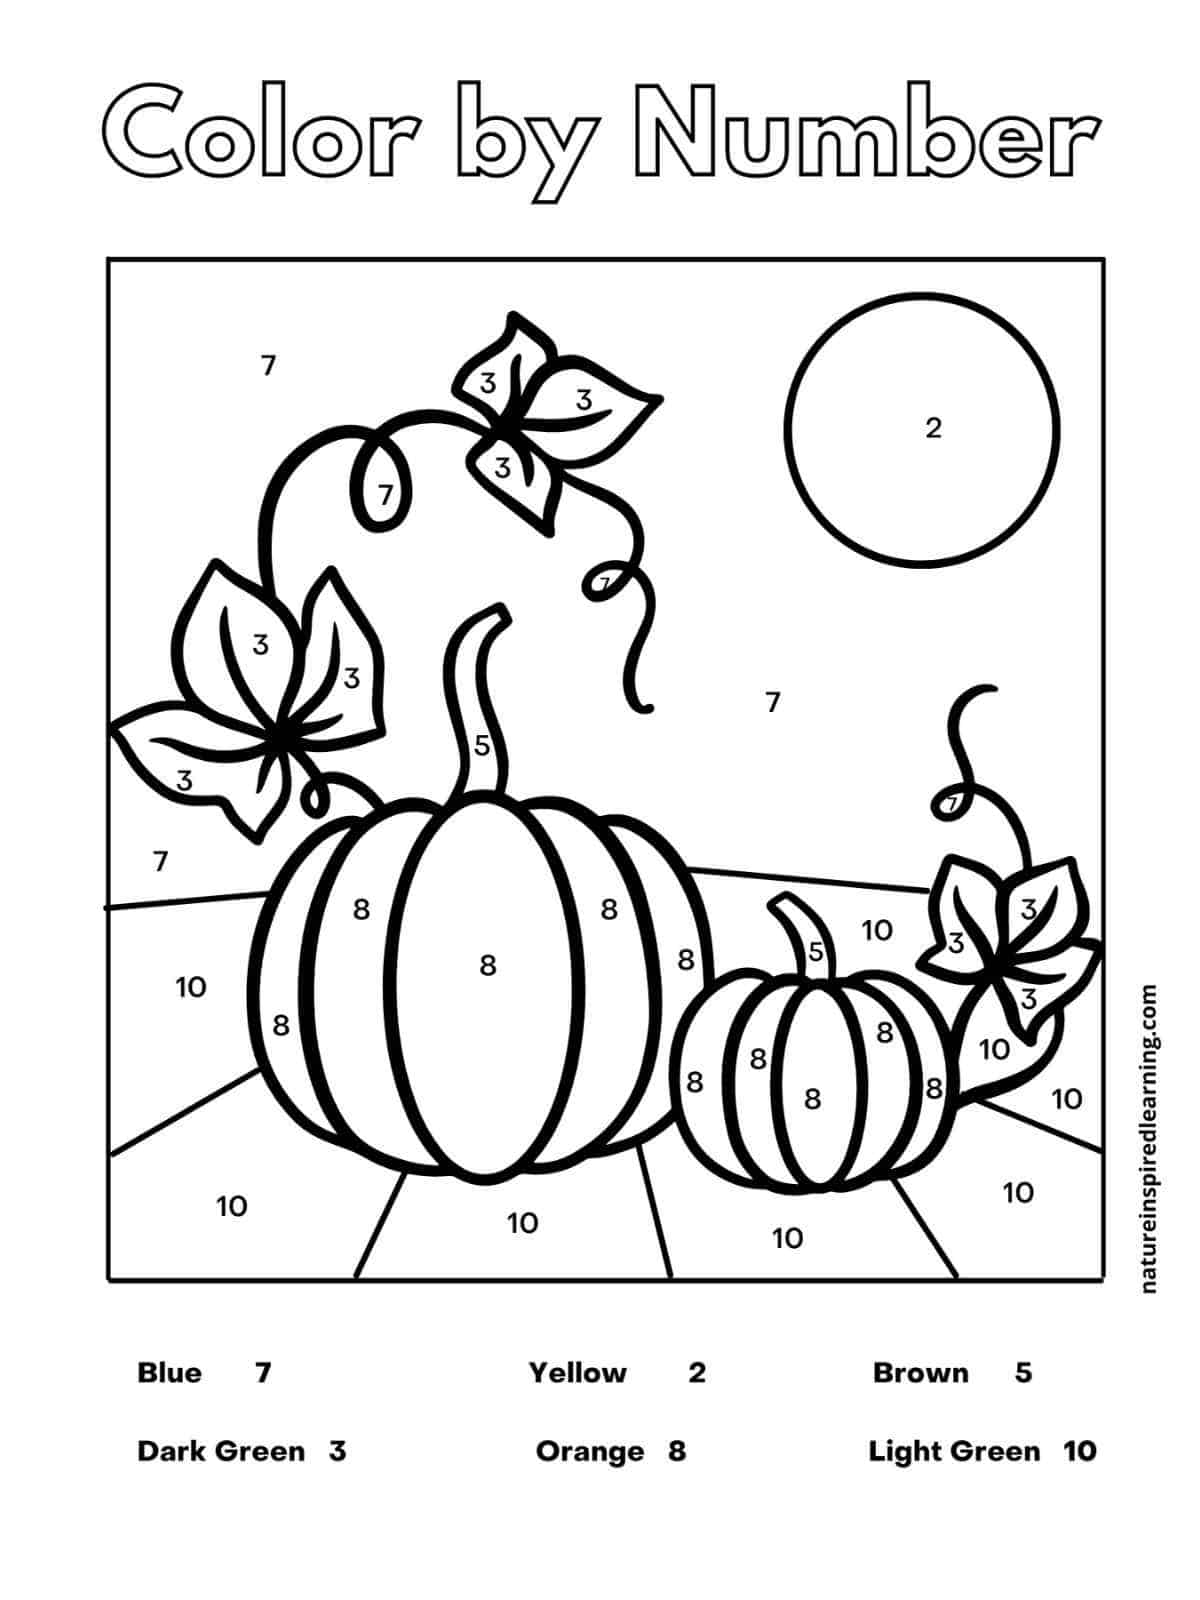 Black and white worksheet with two pumpkins and vine with a full moon with numbers in the image. Color by Number across the top with a color key at bottom